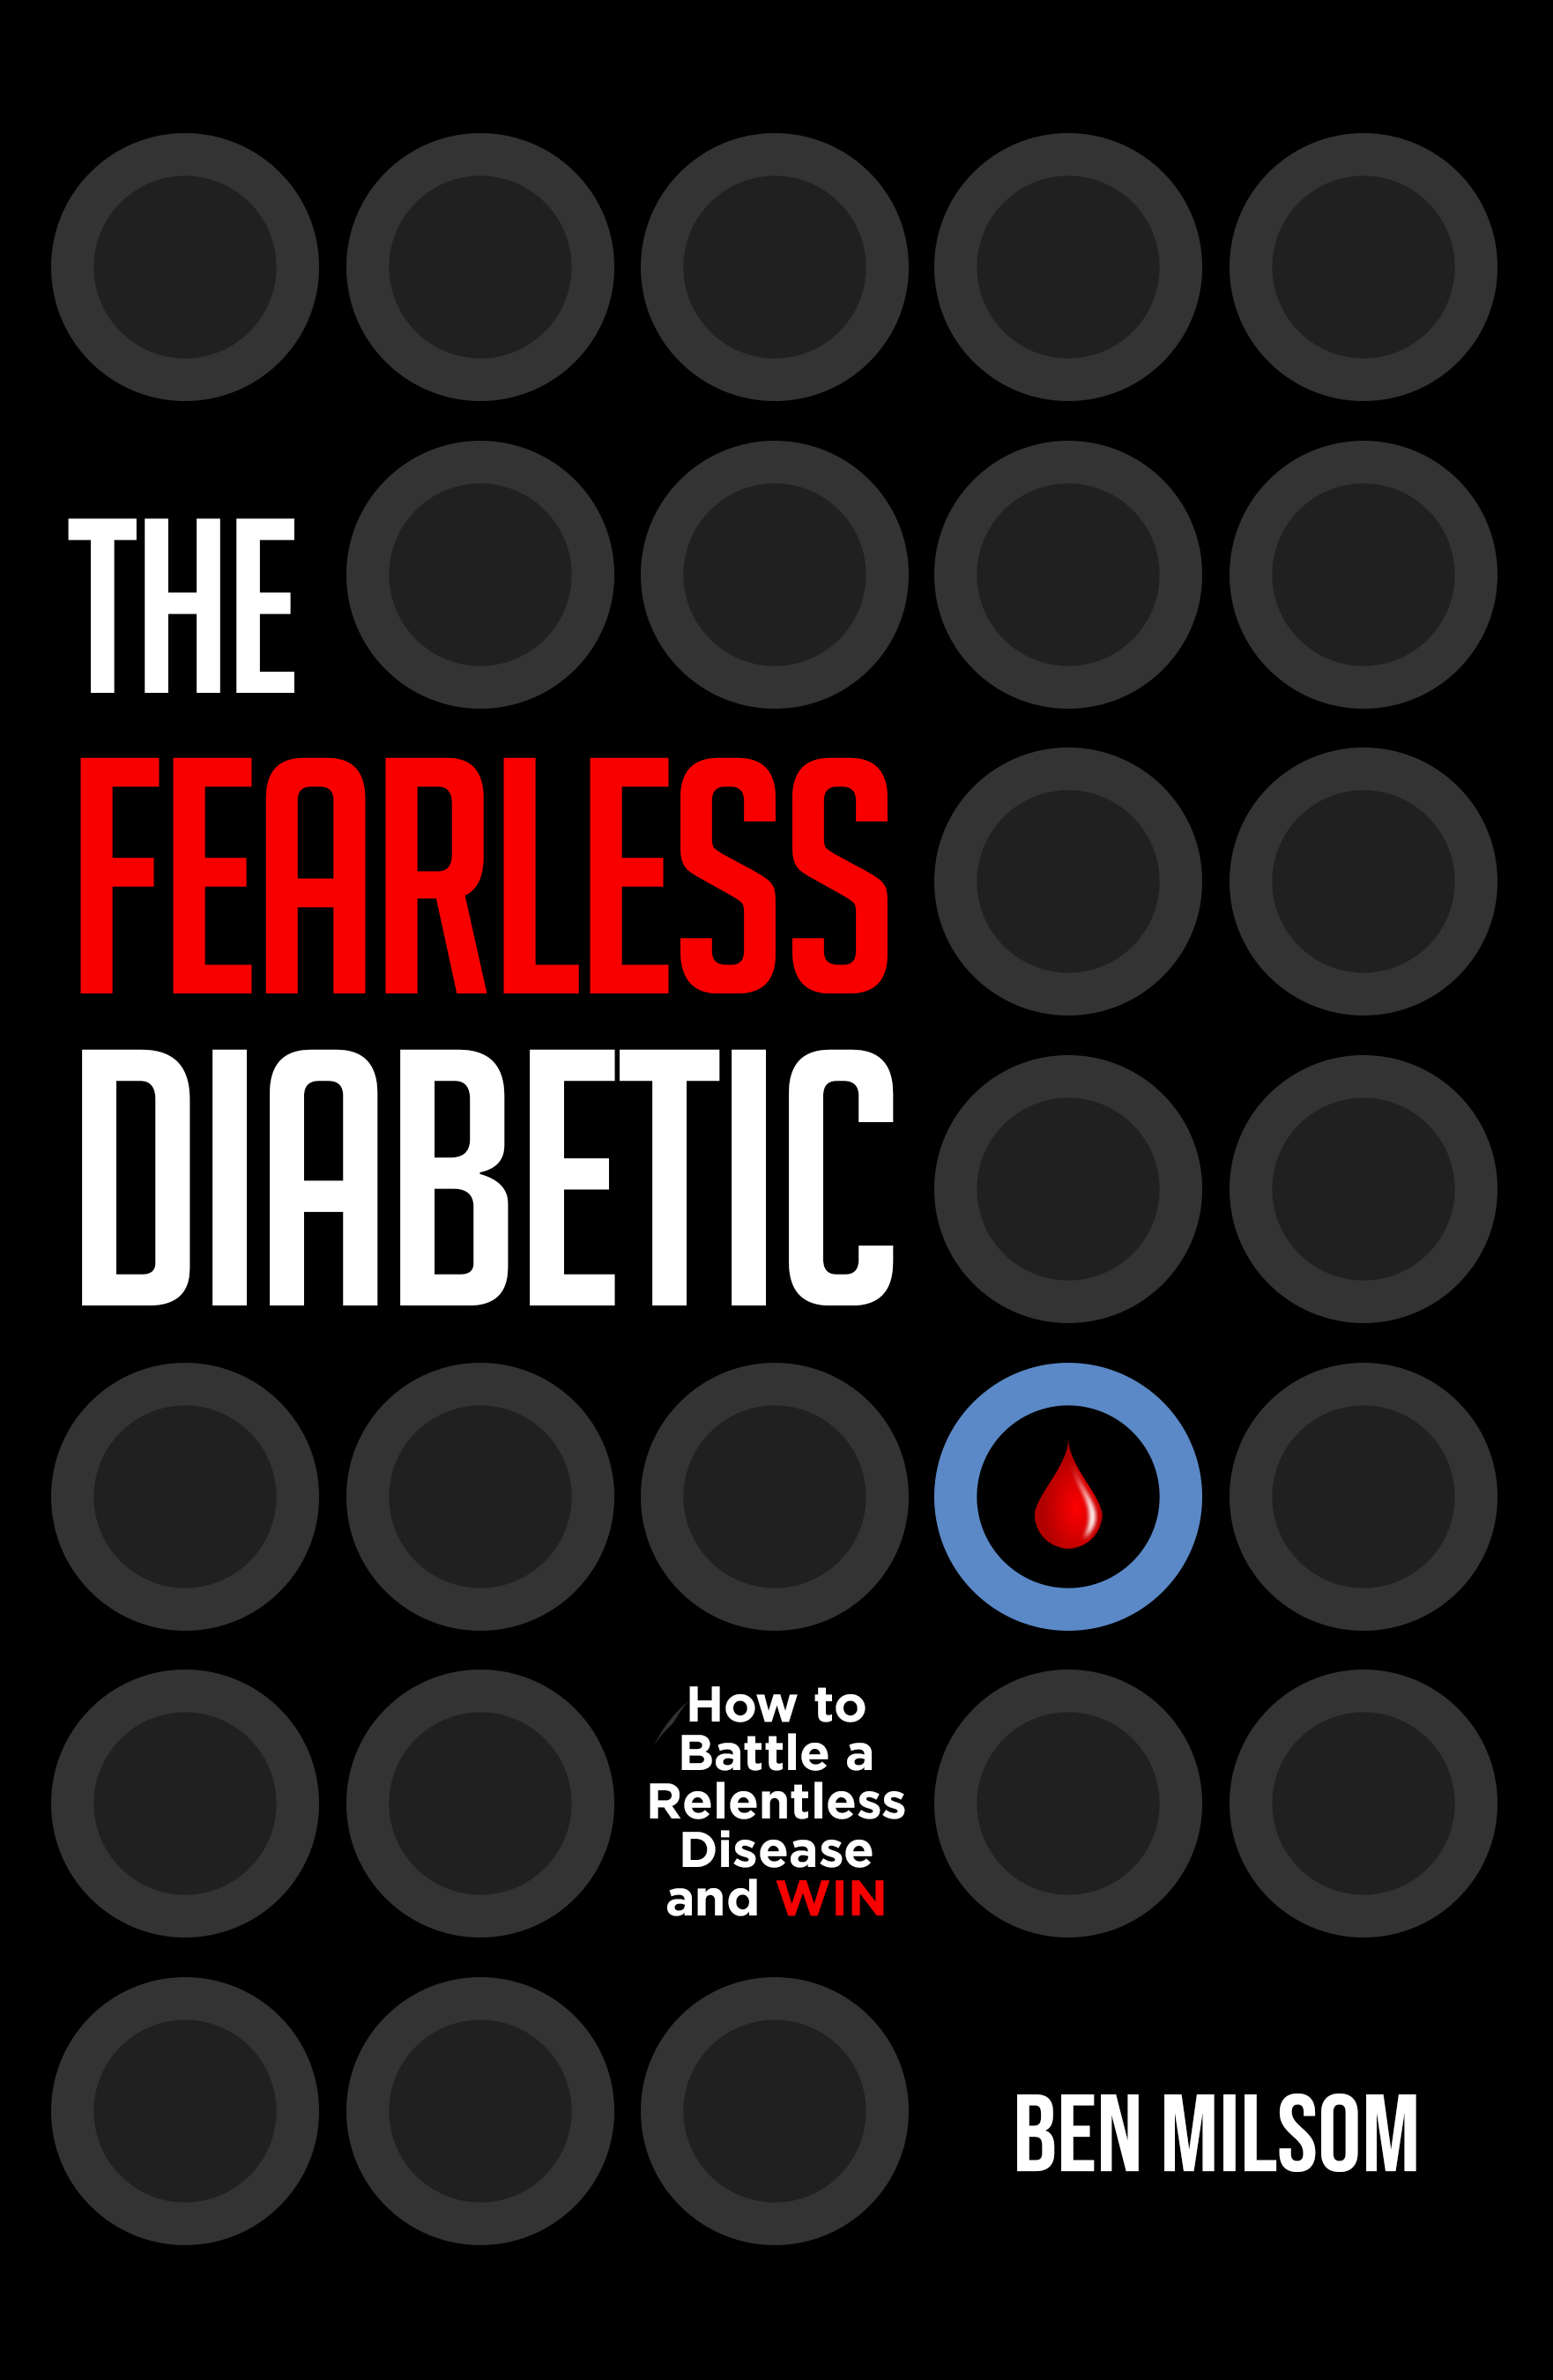 The Fearless Diabetic book cover